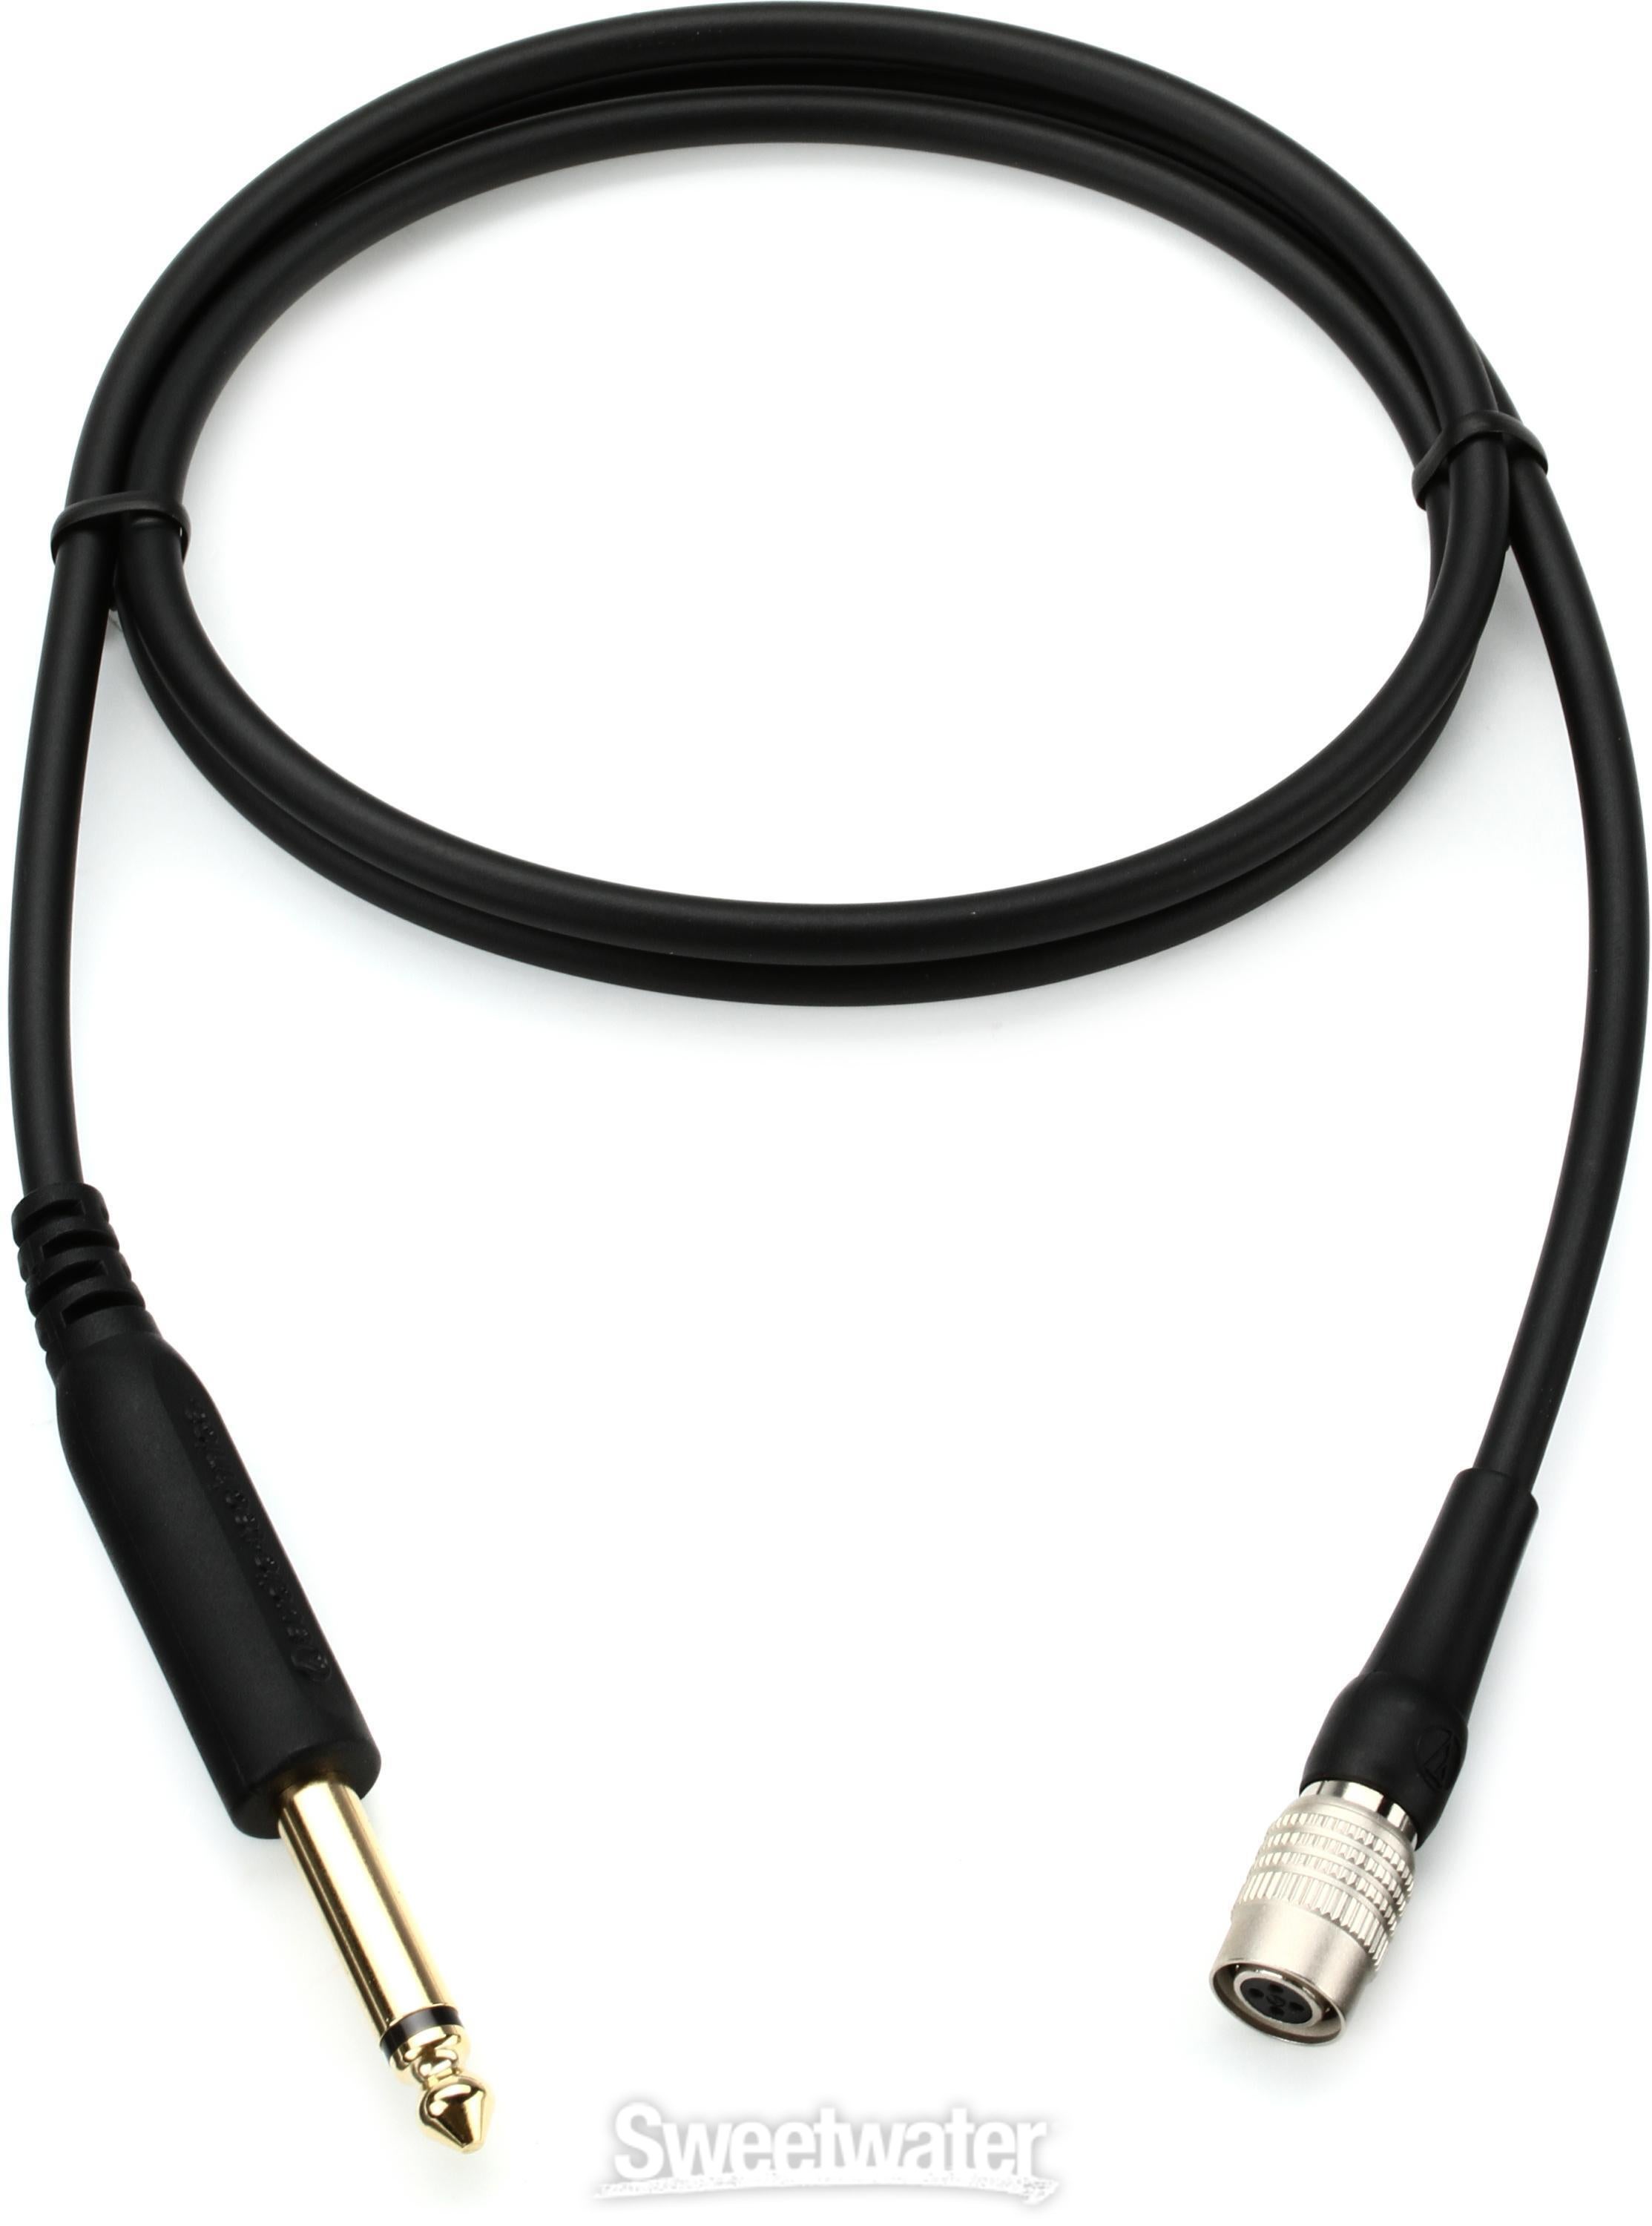 Audio-Technica AT-GcW Guitar Cable for Wireless Bodypack